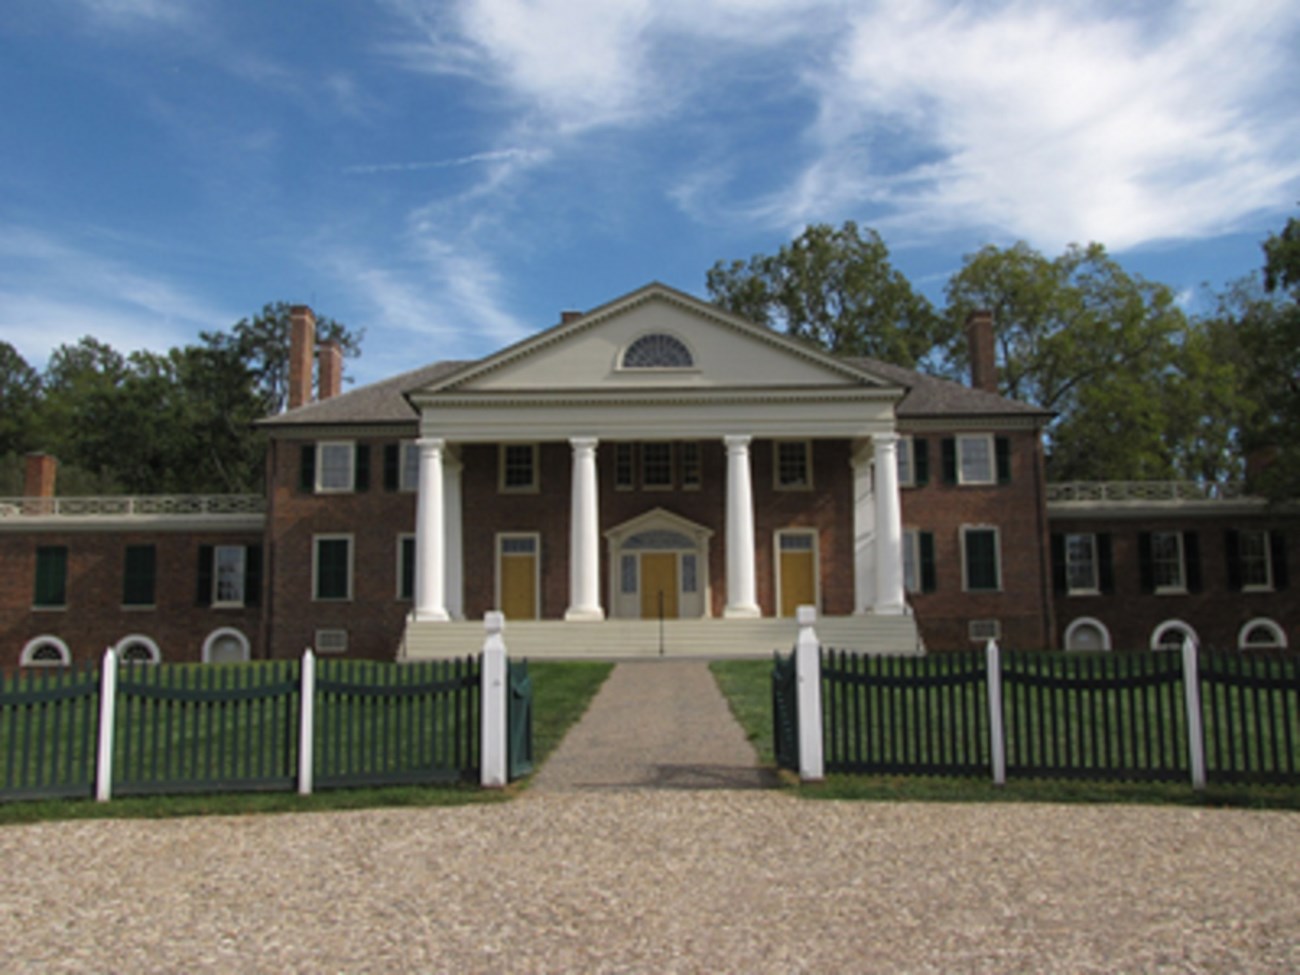 Photo of a large brick house with columns.